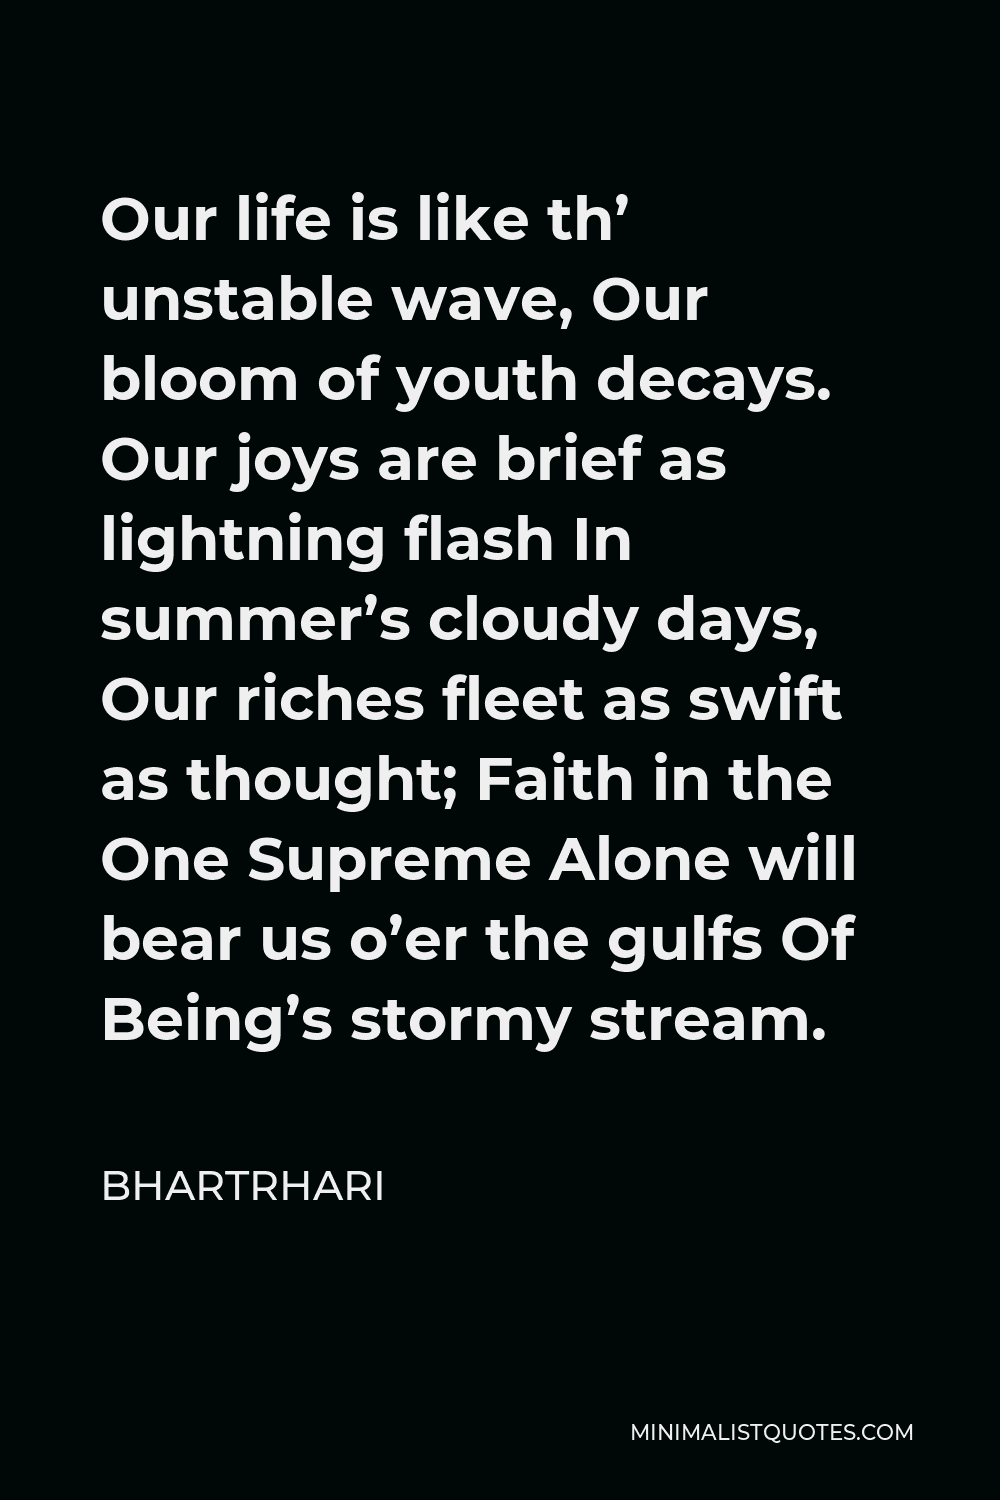 Bhartrhari Quote - Our life is like th’ unstable wave, Our bloom of youth decays. Our joys are brief as lightning flash In summer’s cloudy days, Our riches fleet as swift as thought; Faith in the One Supreme Alone will bear us o’er the gulfs Of Being’s stormy stream.